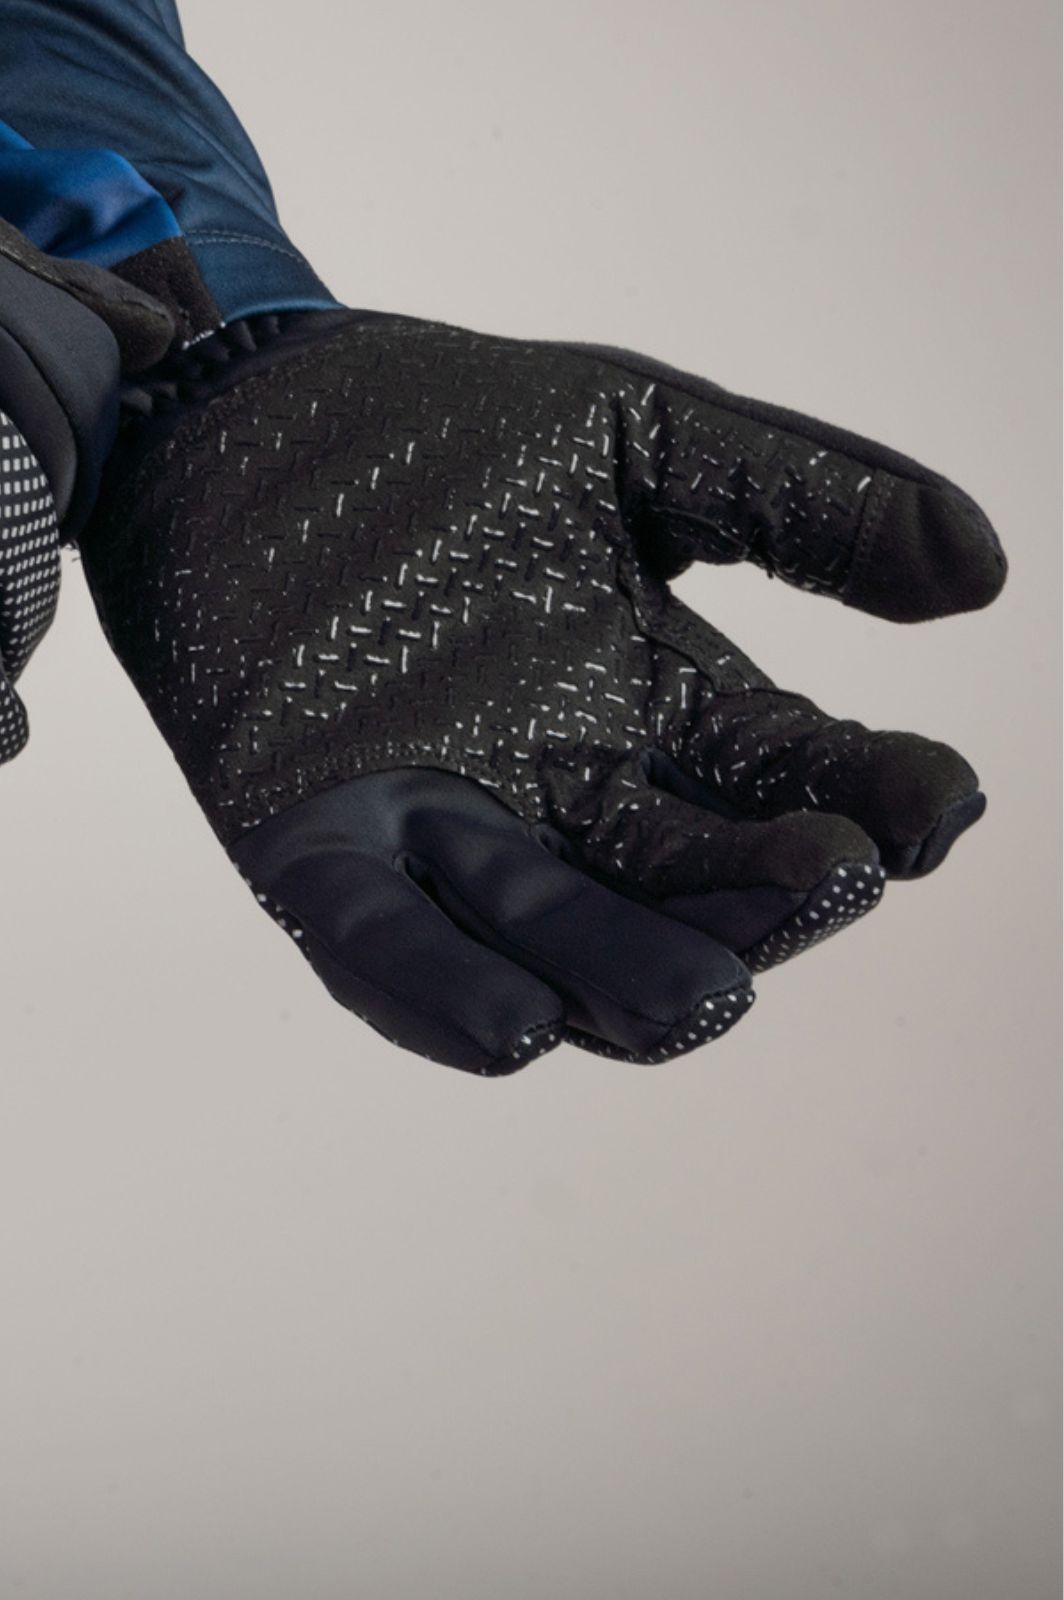 Winter Cycling Gloves - Alpine